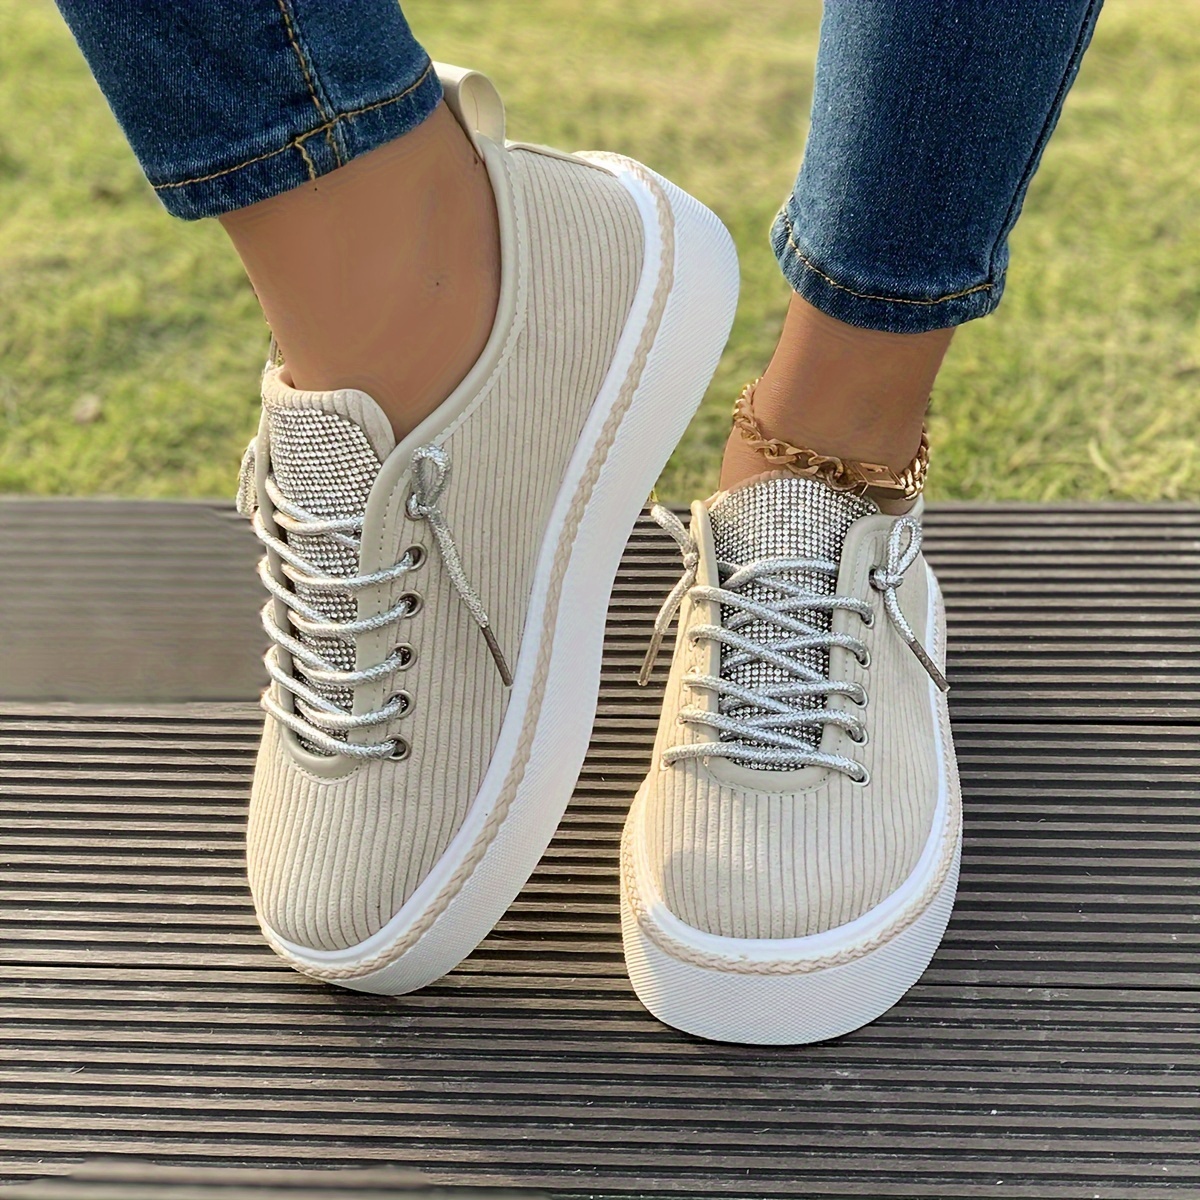 Women's Trendy Platform Sneakers, Heightening Lace Up Low Top Skate Shoes,  Stylish Air Cushion Wedge Trainers